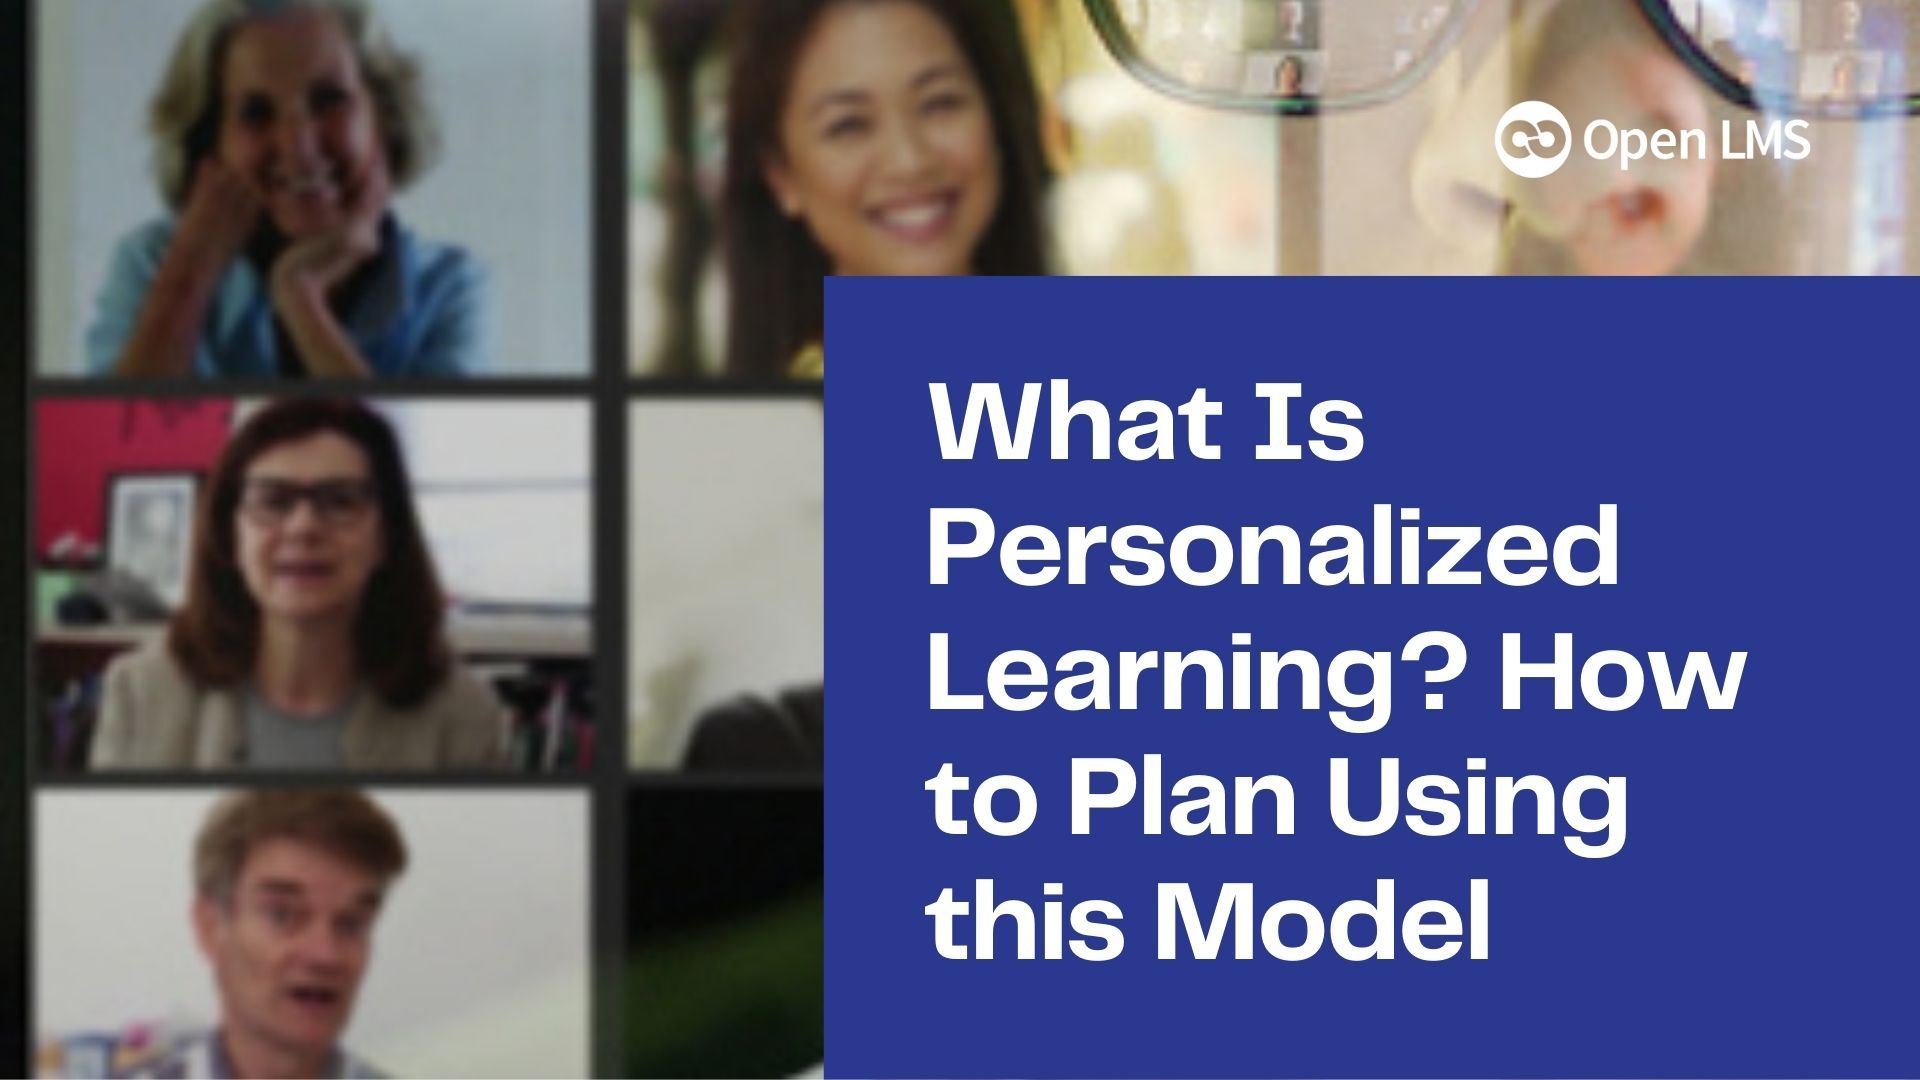 What Is Personalized Learning? How to Plan Using this Model